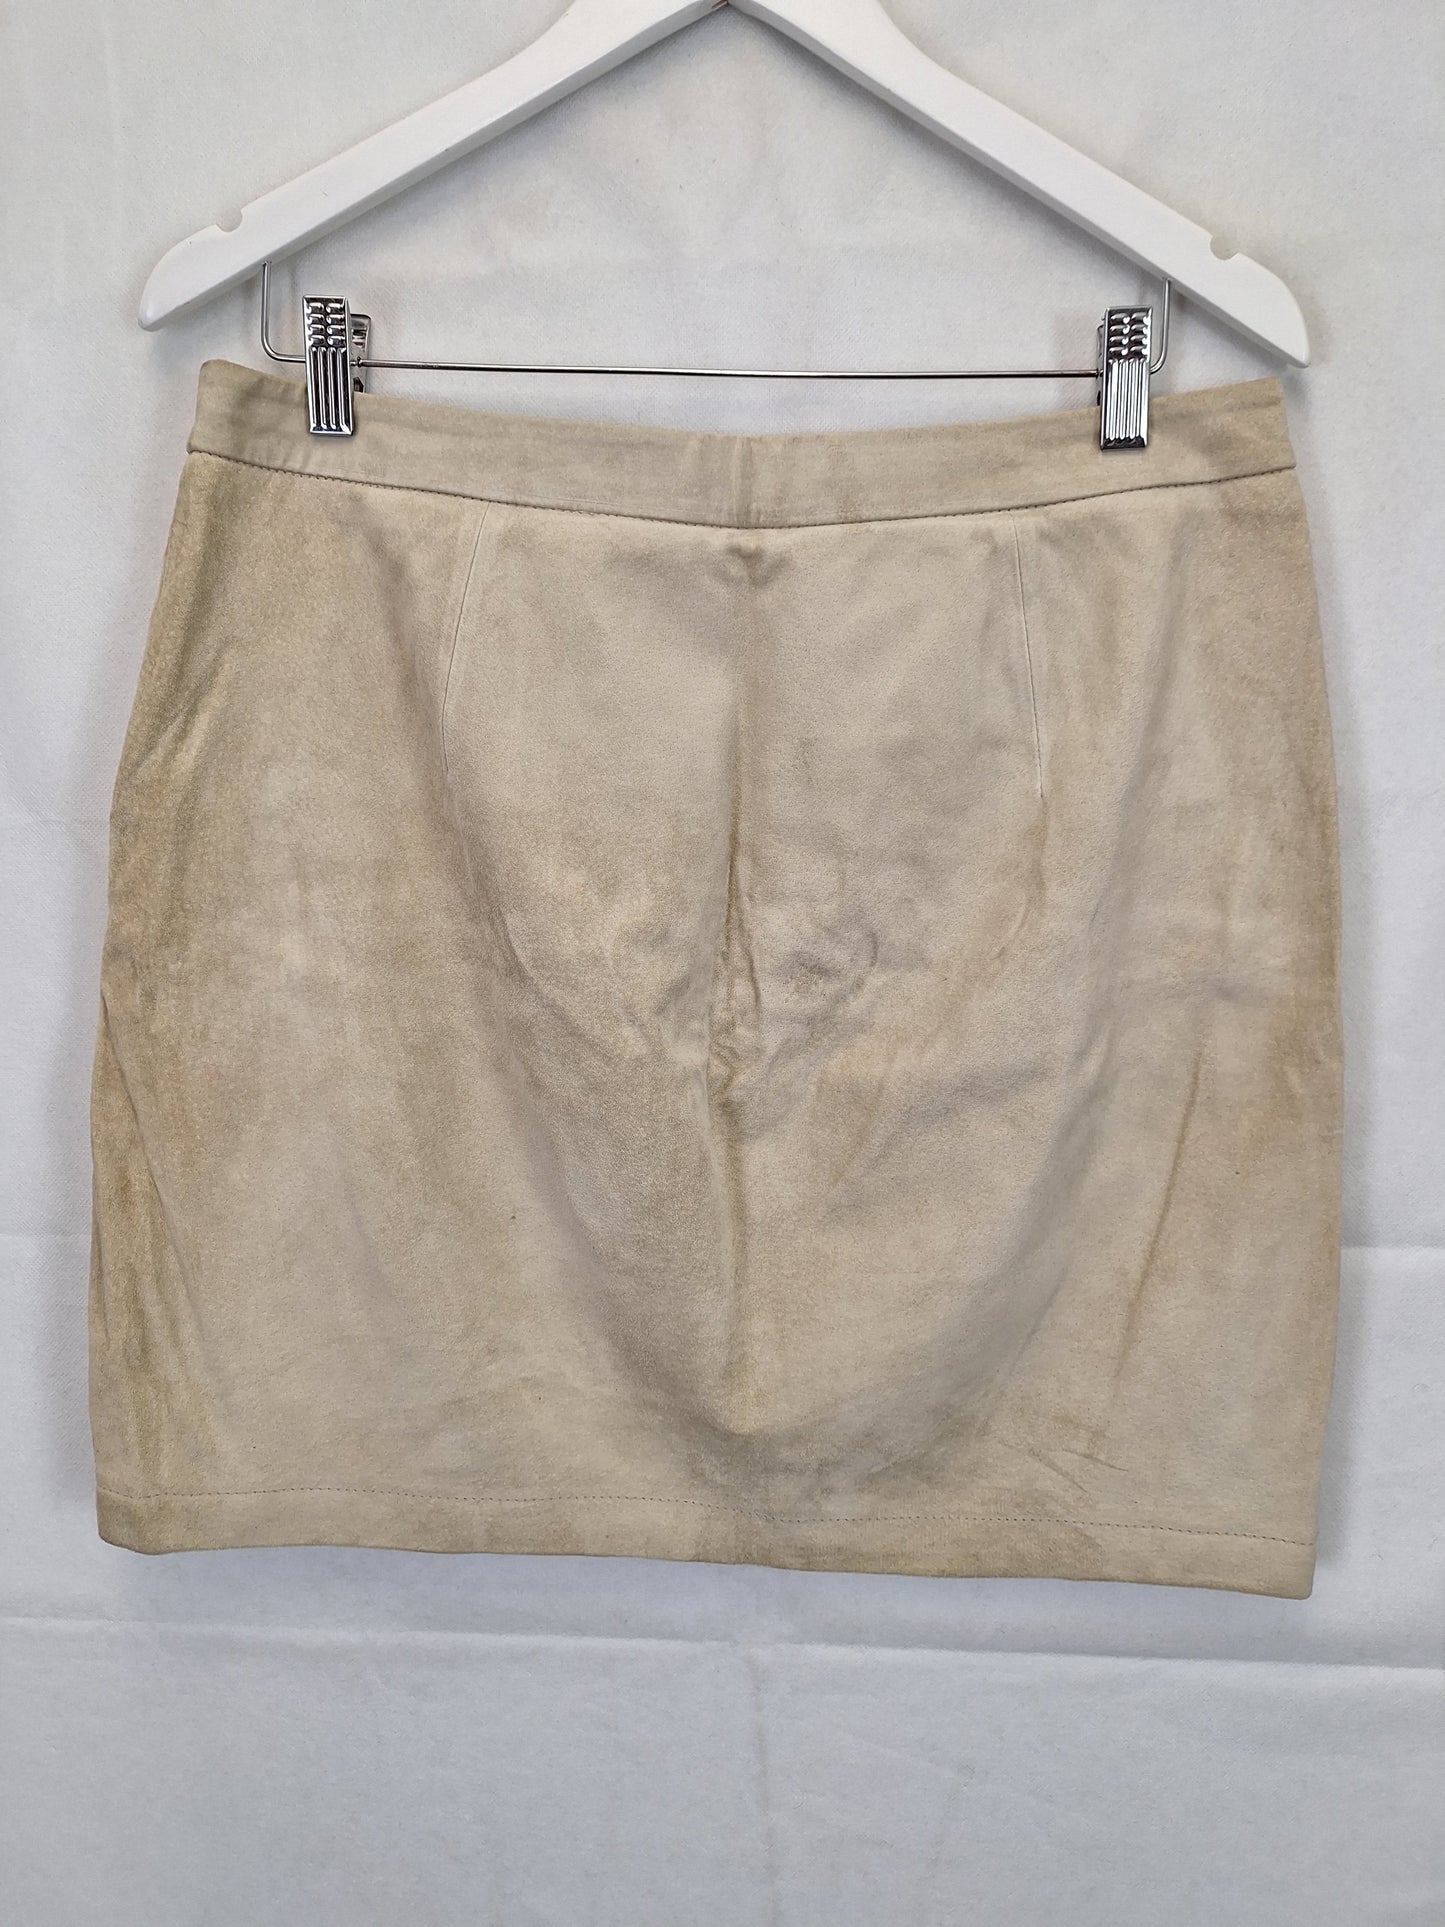 Jeanswest Genuine Leather Zip Midi Skirt Size 12 by SwapUp-Online Second Hand Store-Online Thrift Store